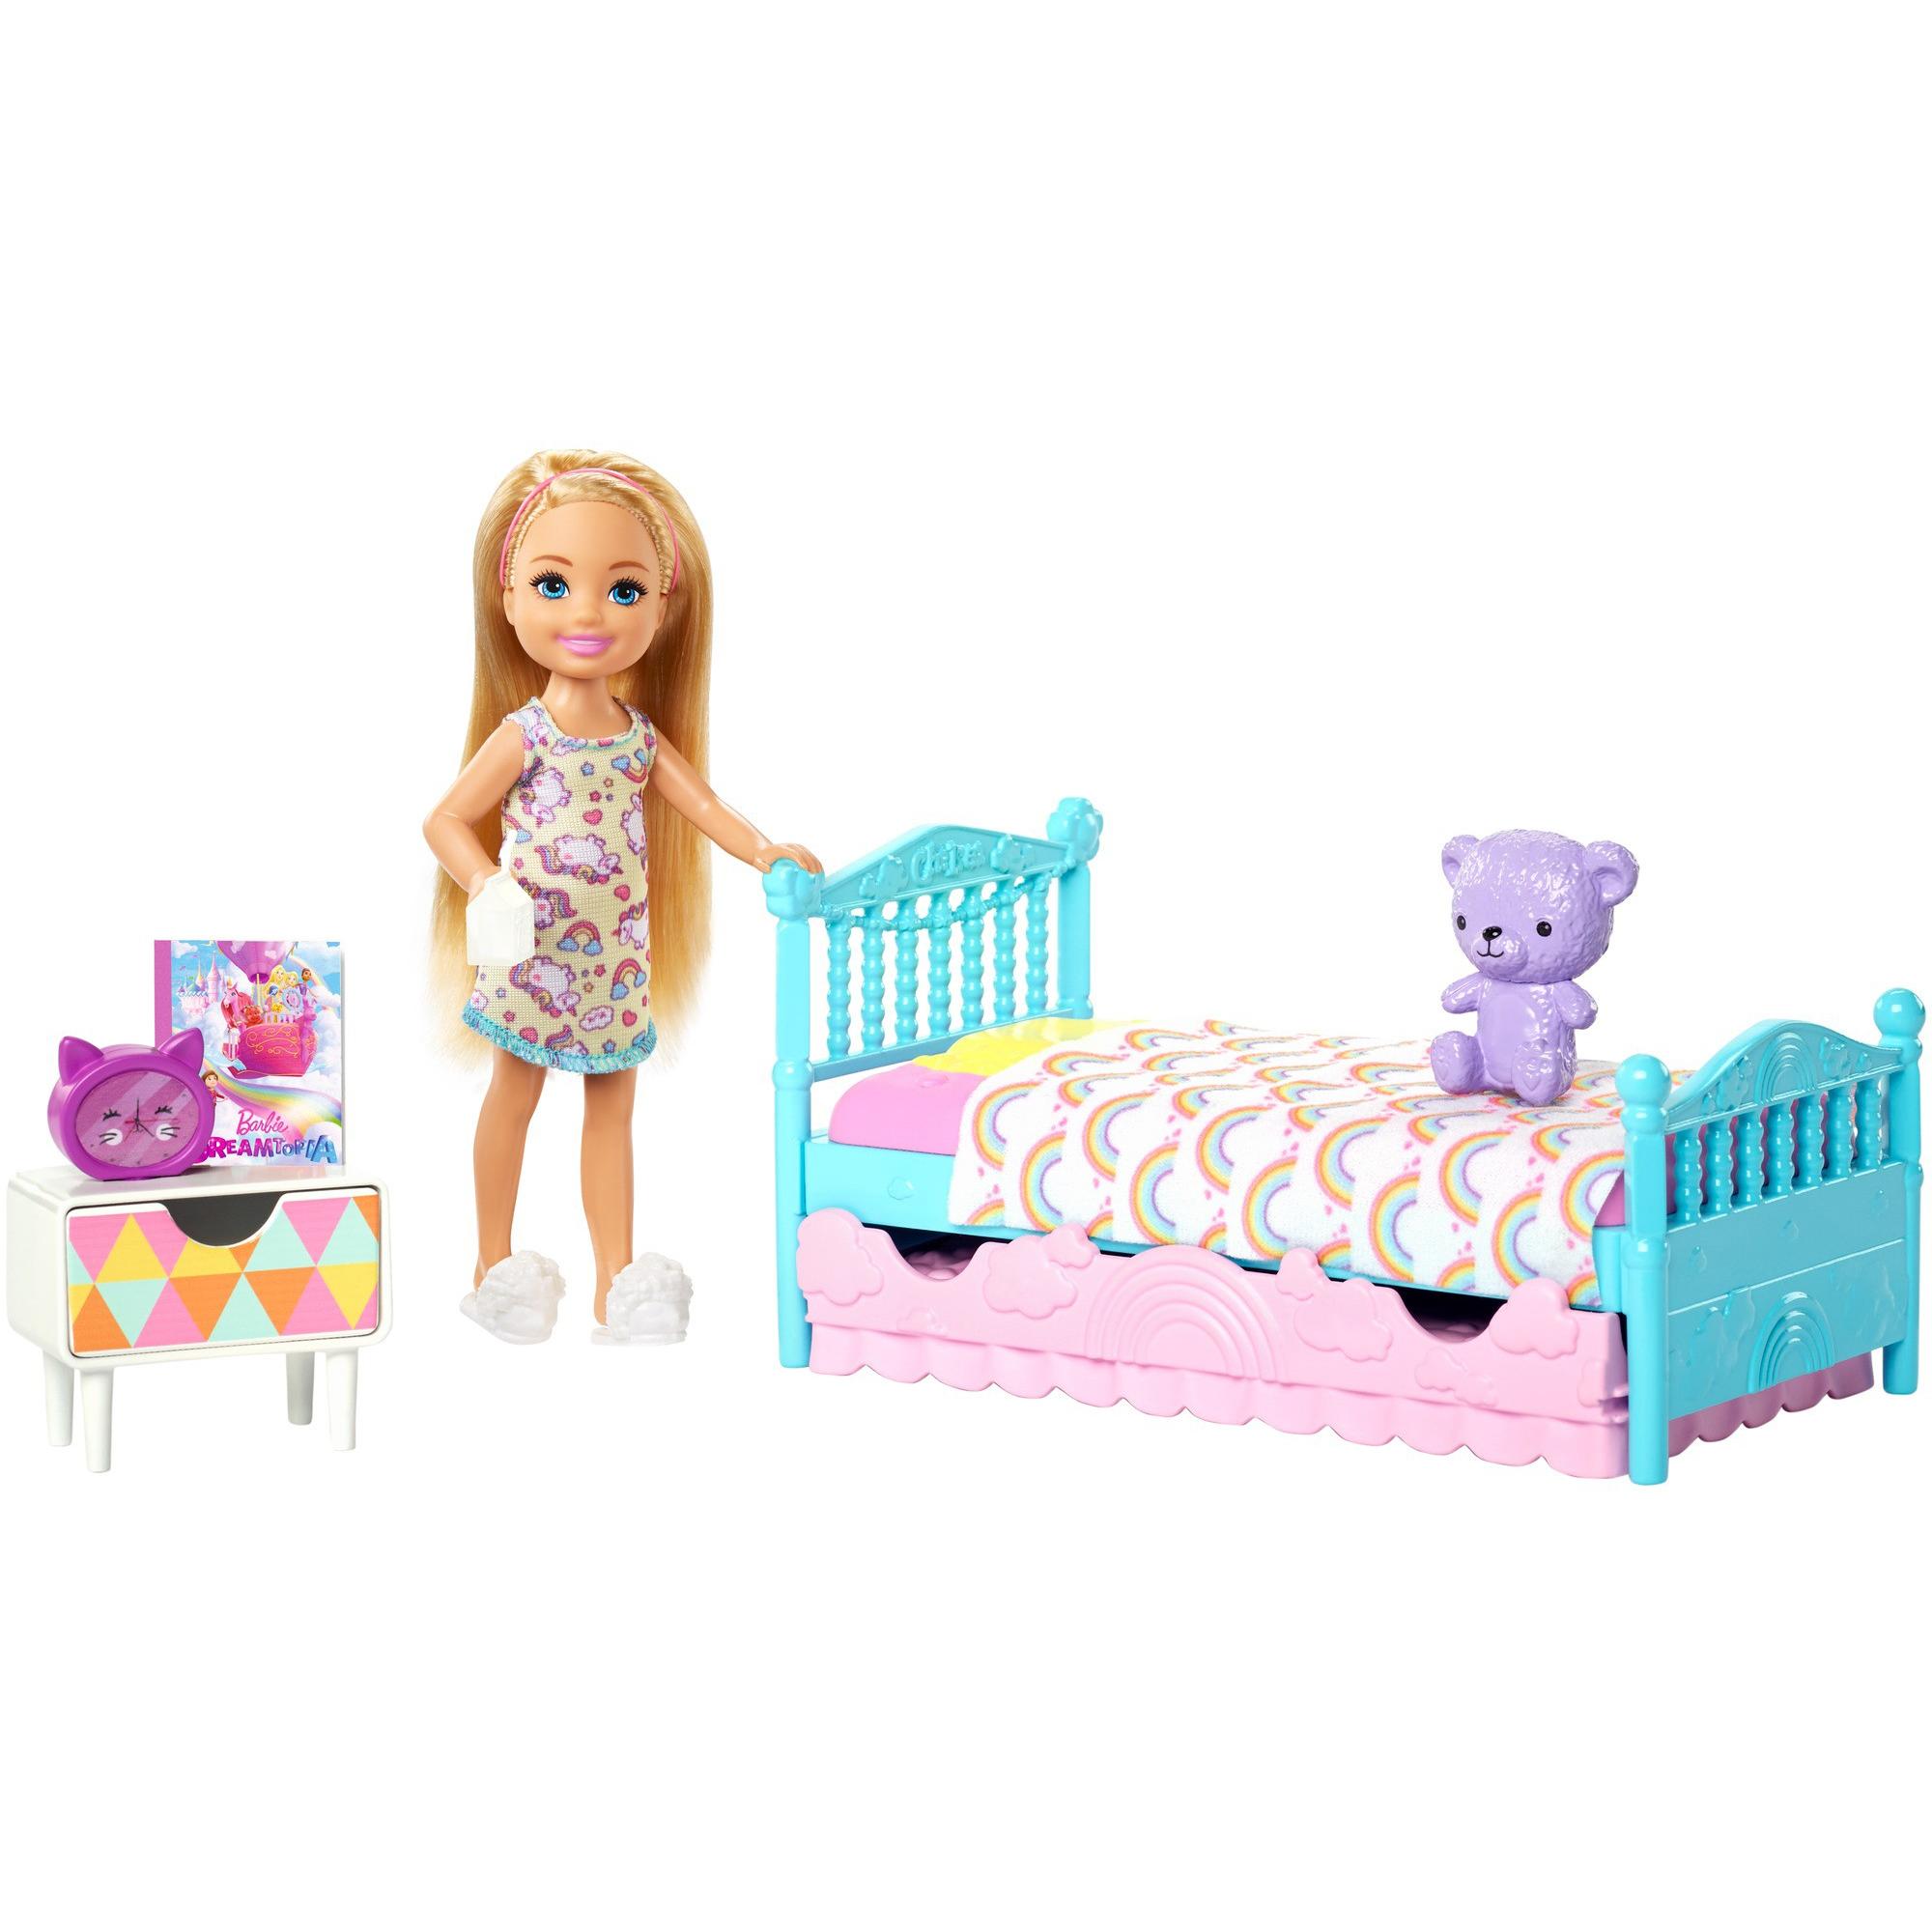 Barbie Club Chelsea Bedtime Doll and Bedroom Playset - image 1 of 8